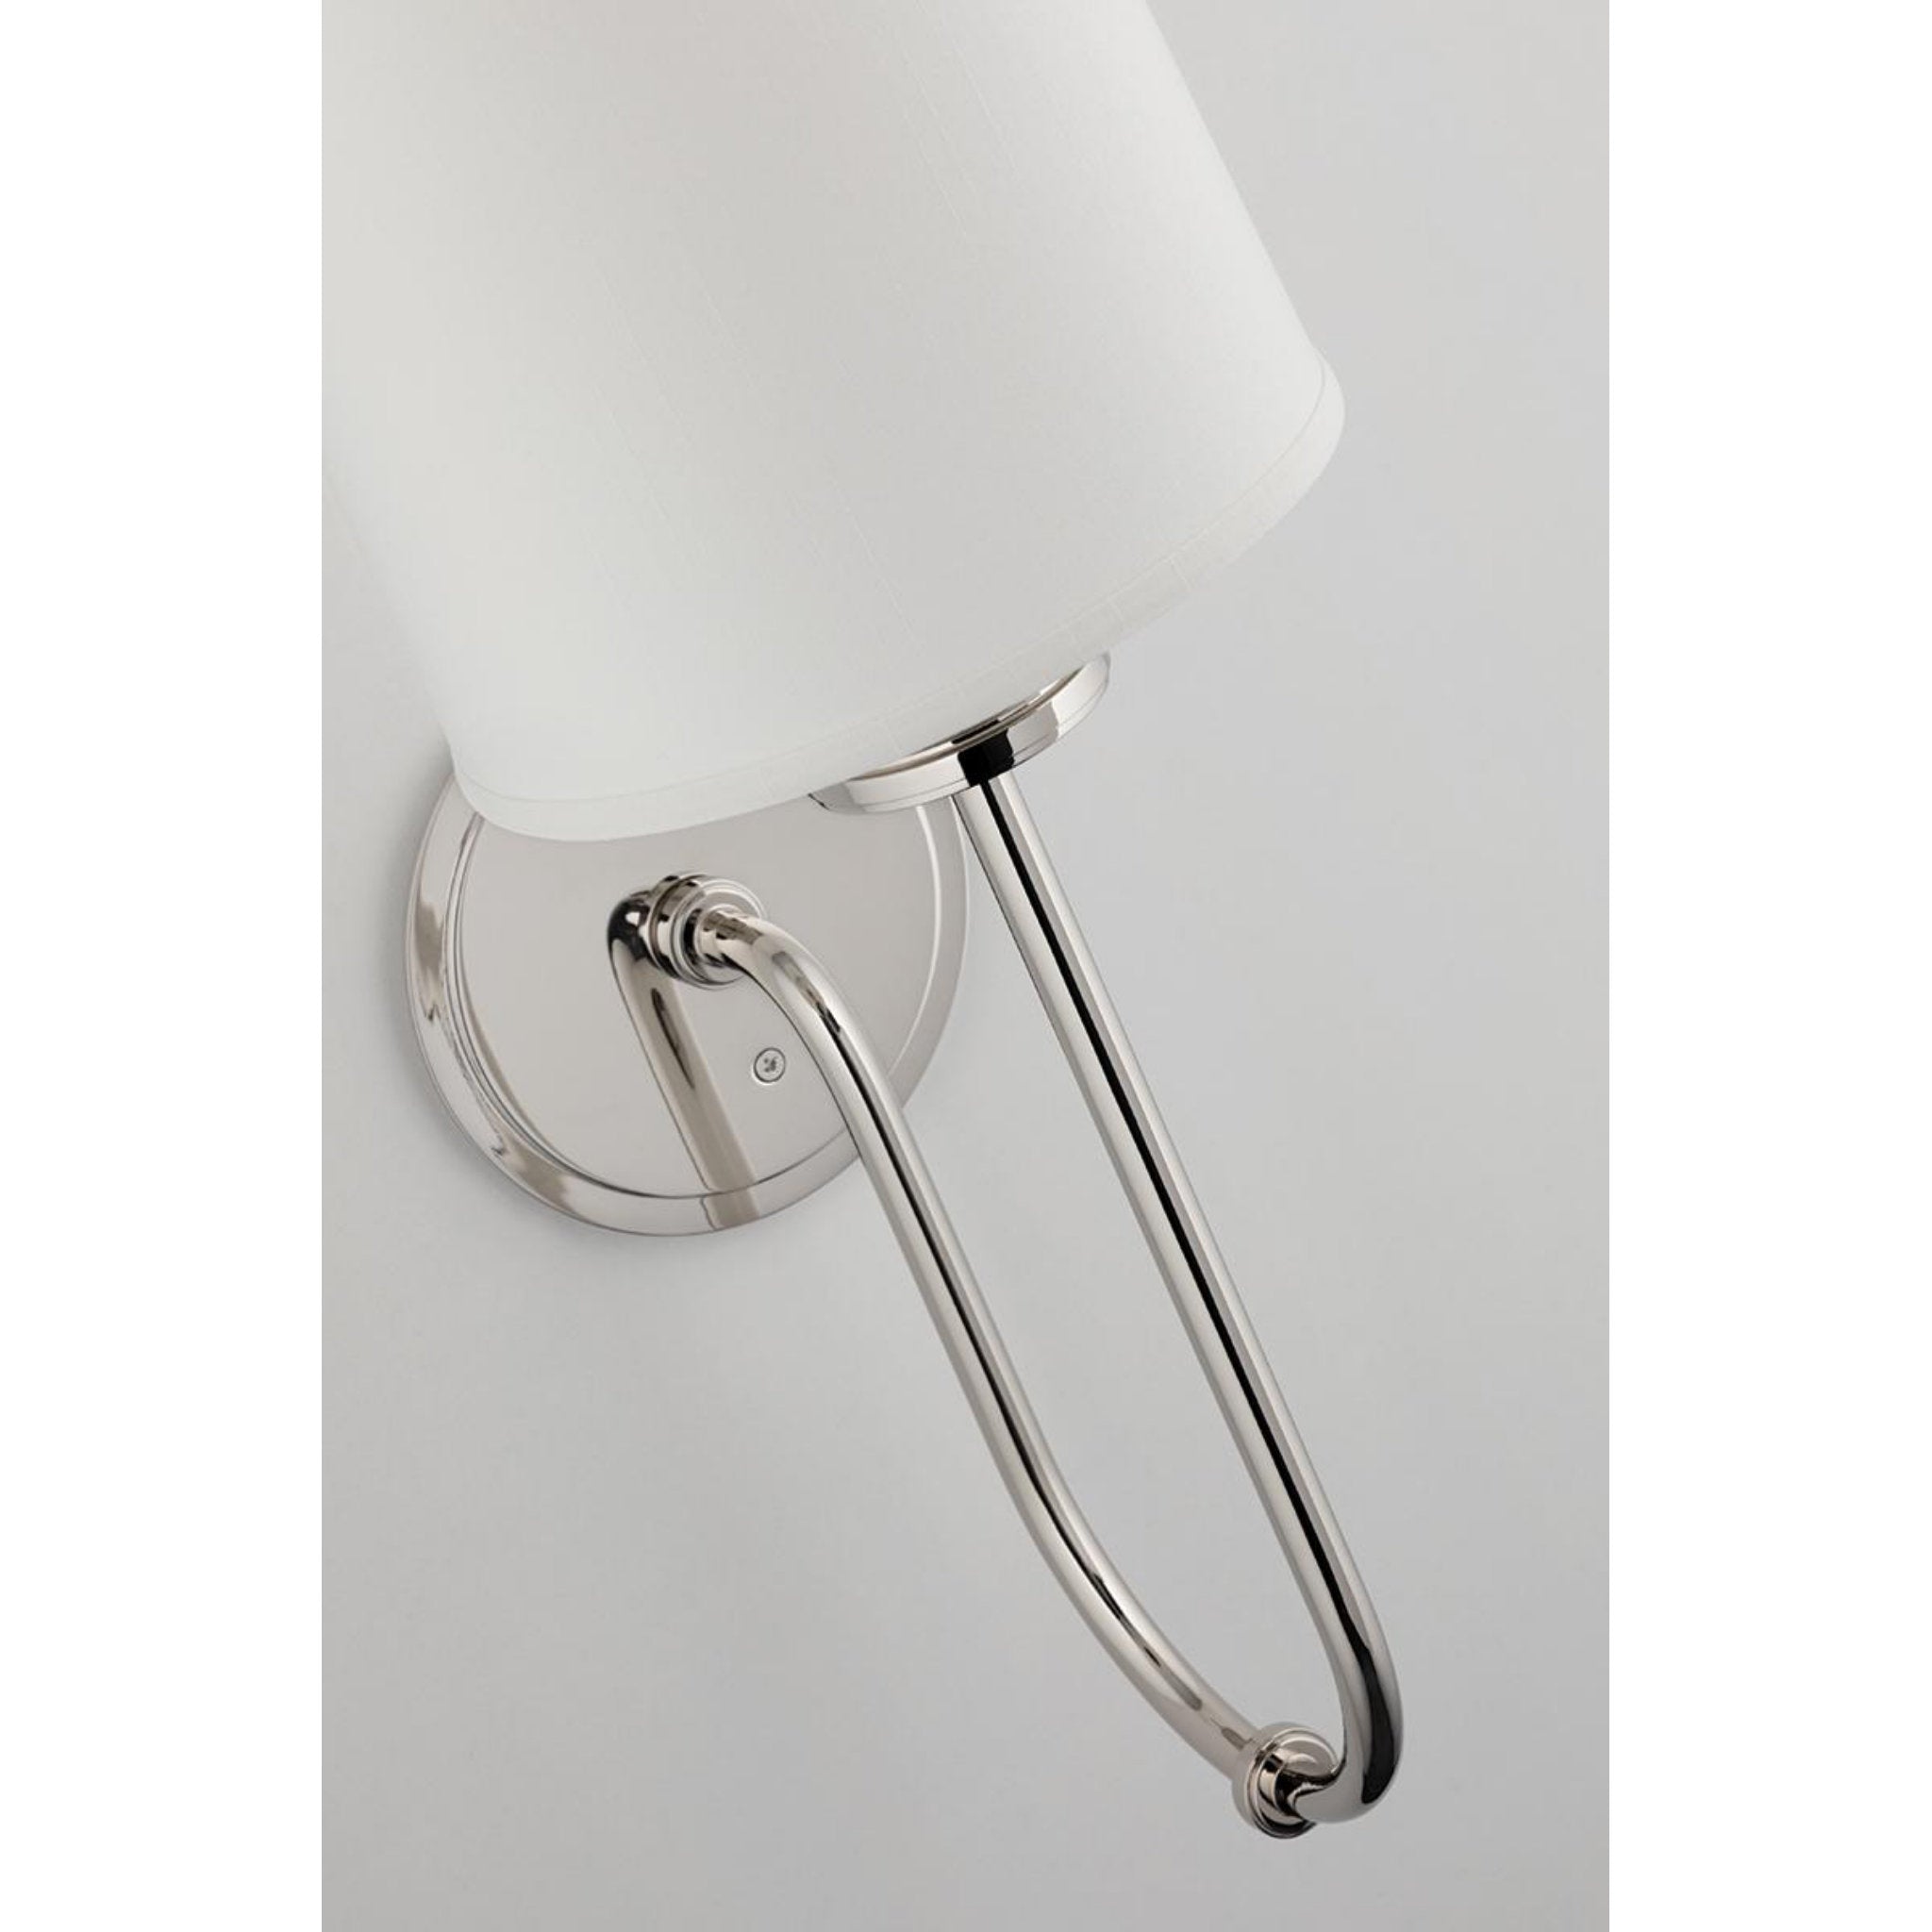 Jericho 1 Light Wall Sconce in Polished Nickel